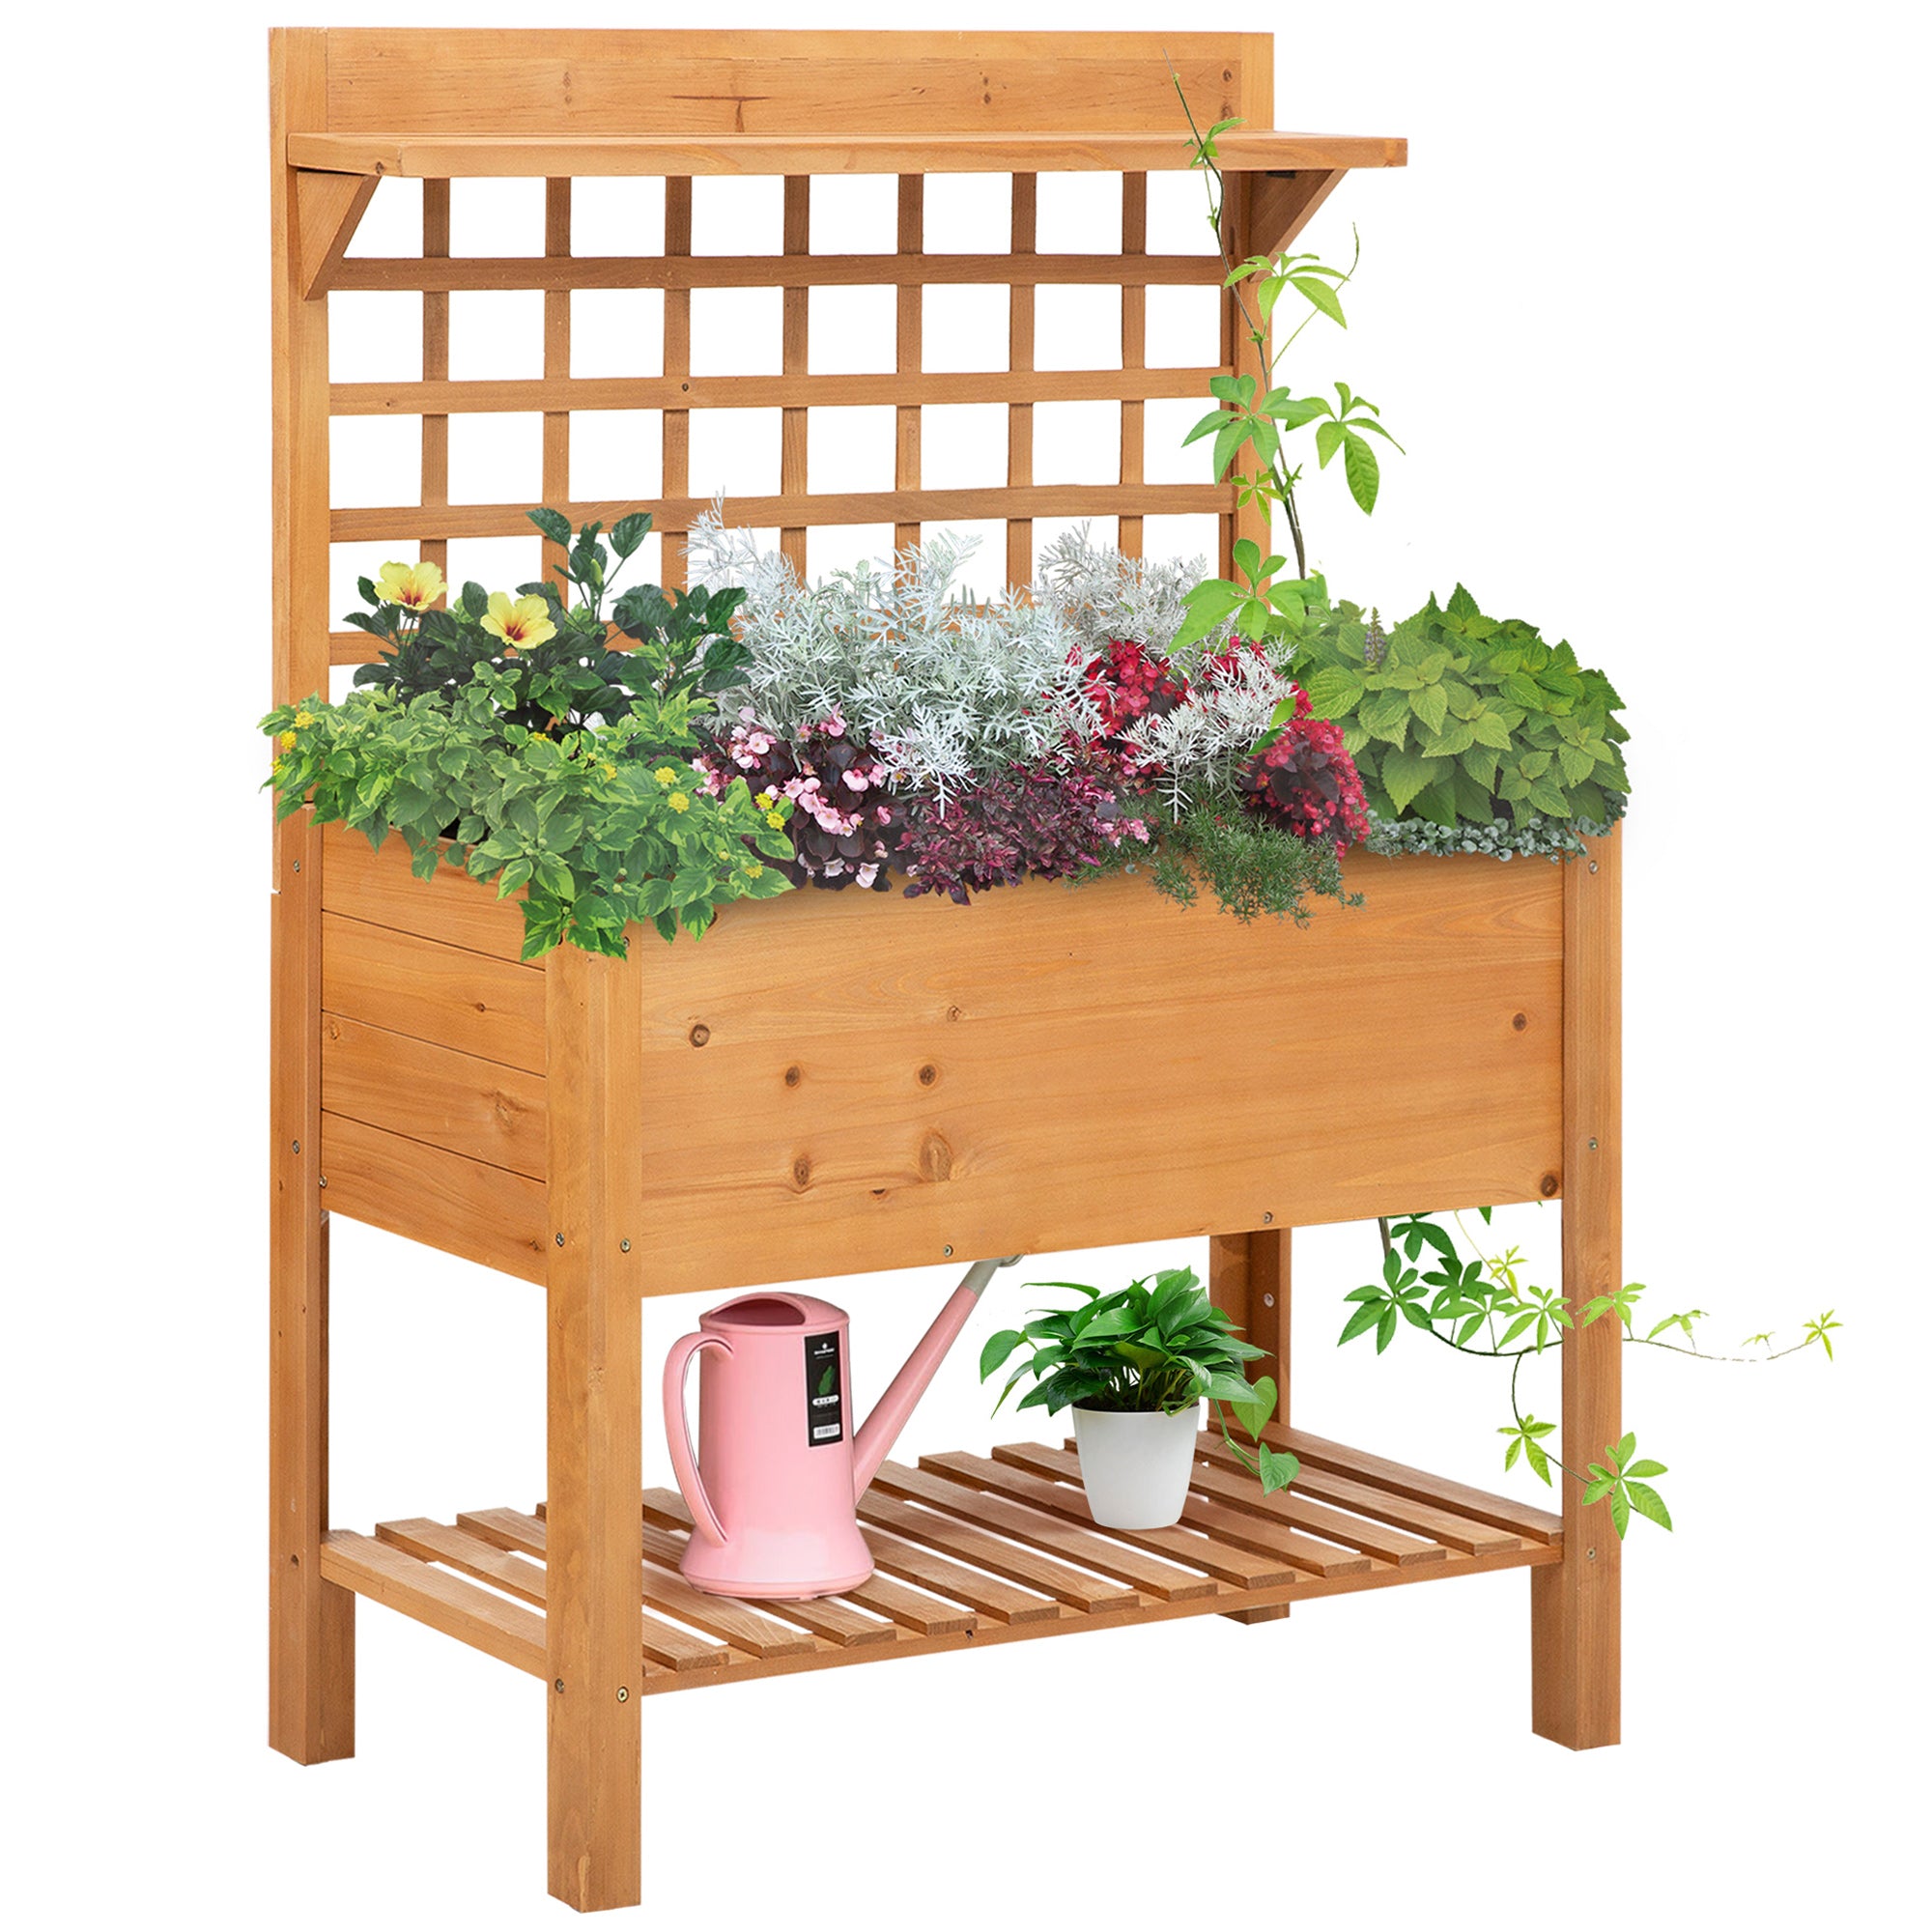 Outsunny Wooden Planter Raised Elevated Garden Bed w/ 2 Shelves - 105x40x135cm  | TJ Hughes